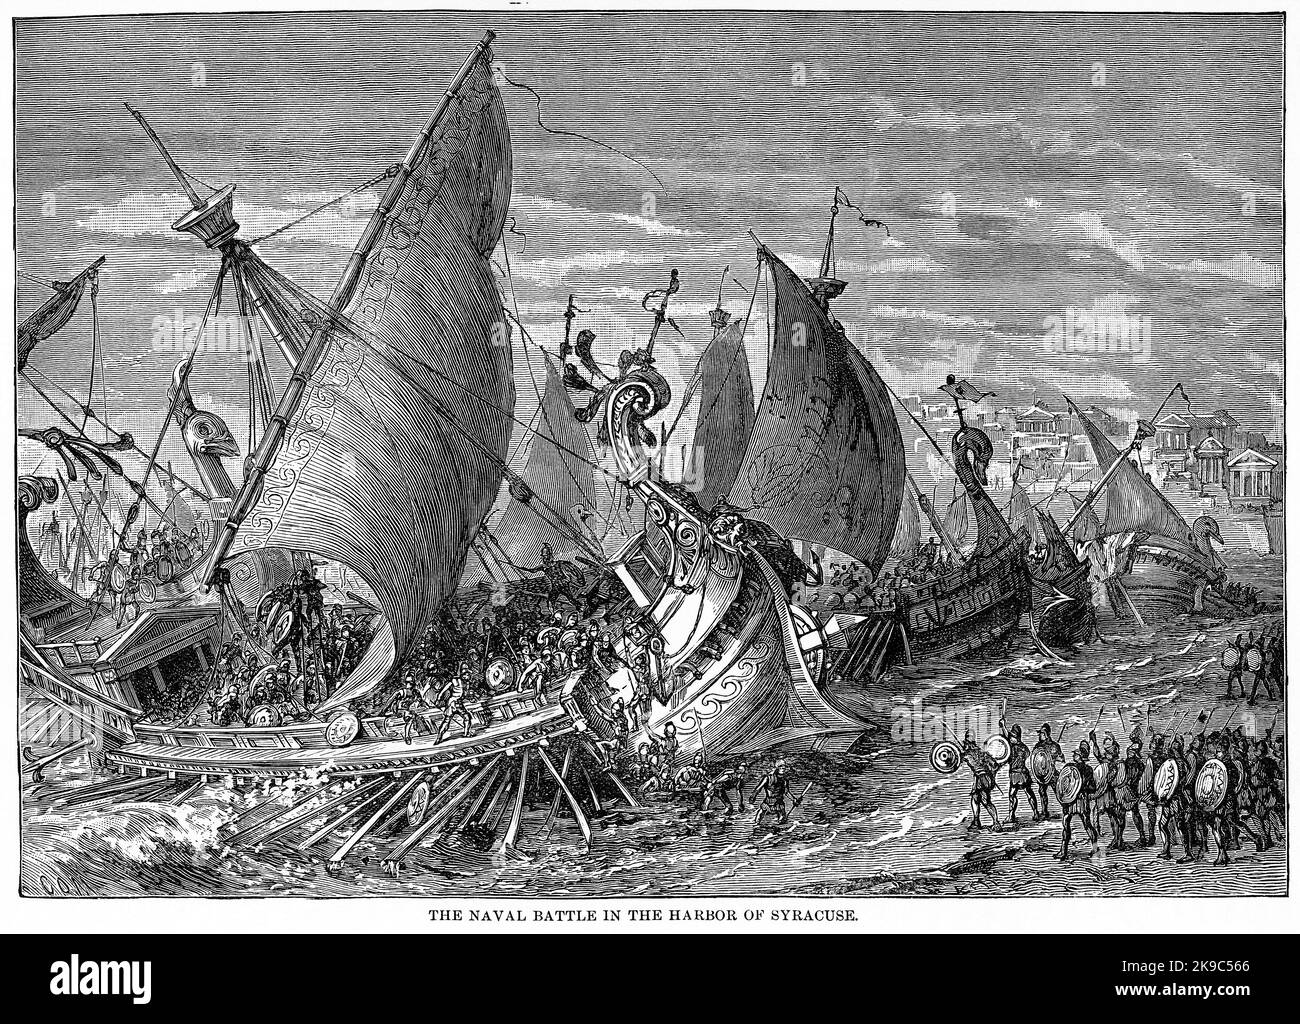 Naval Battle in the Harbor of Syracuse, Illustration, Ridpath's History of the World, Volume I, by John Clark Ridpath, LL. D., Merrill & Baker Publishers, New York, 1894 Stock Photo